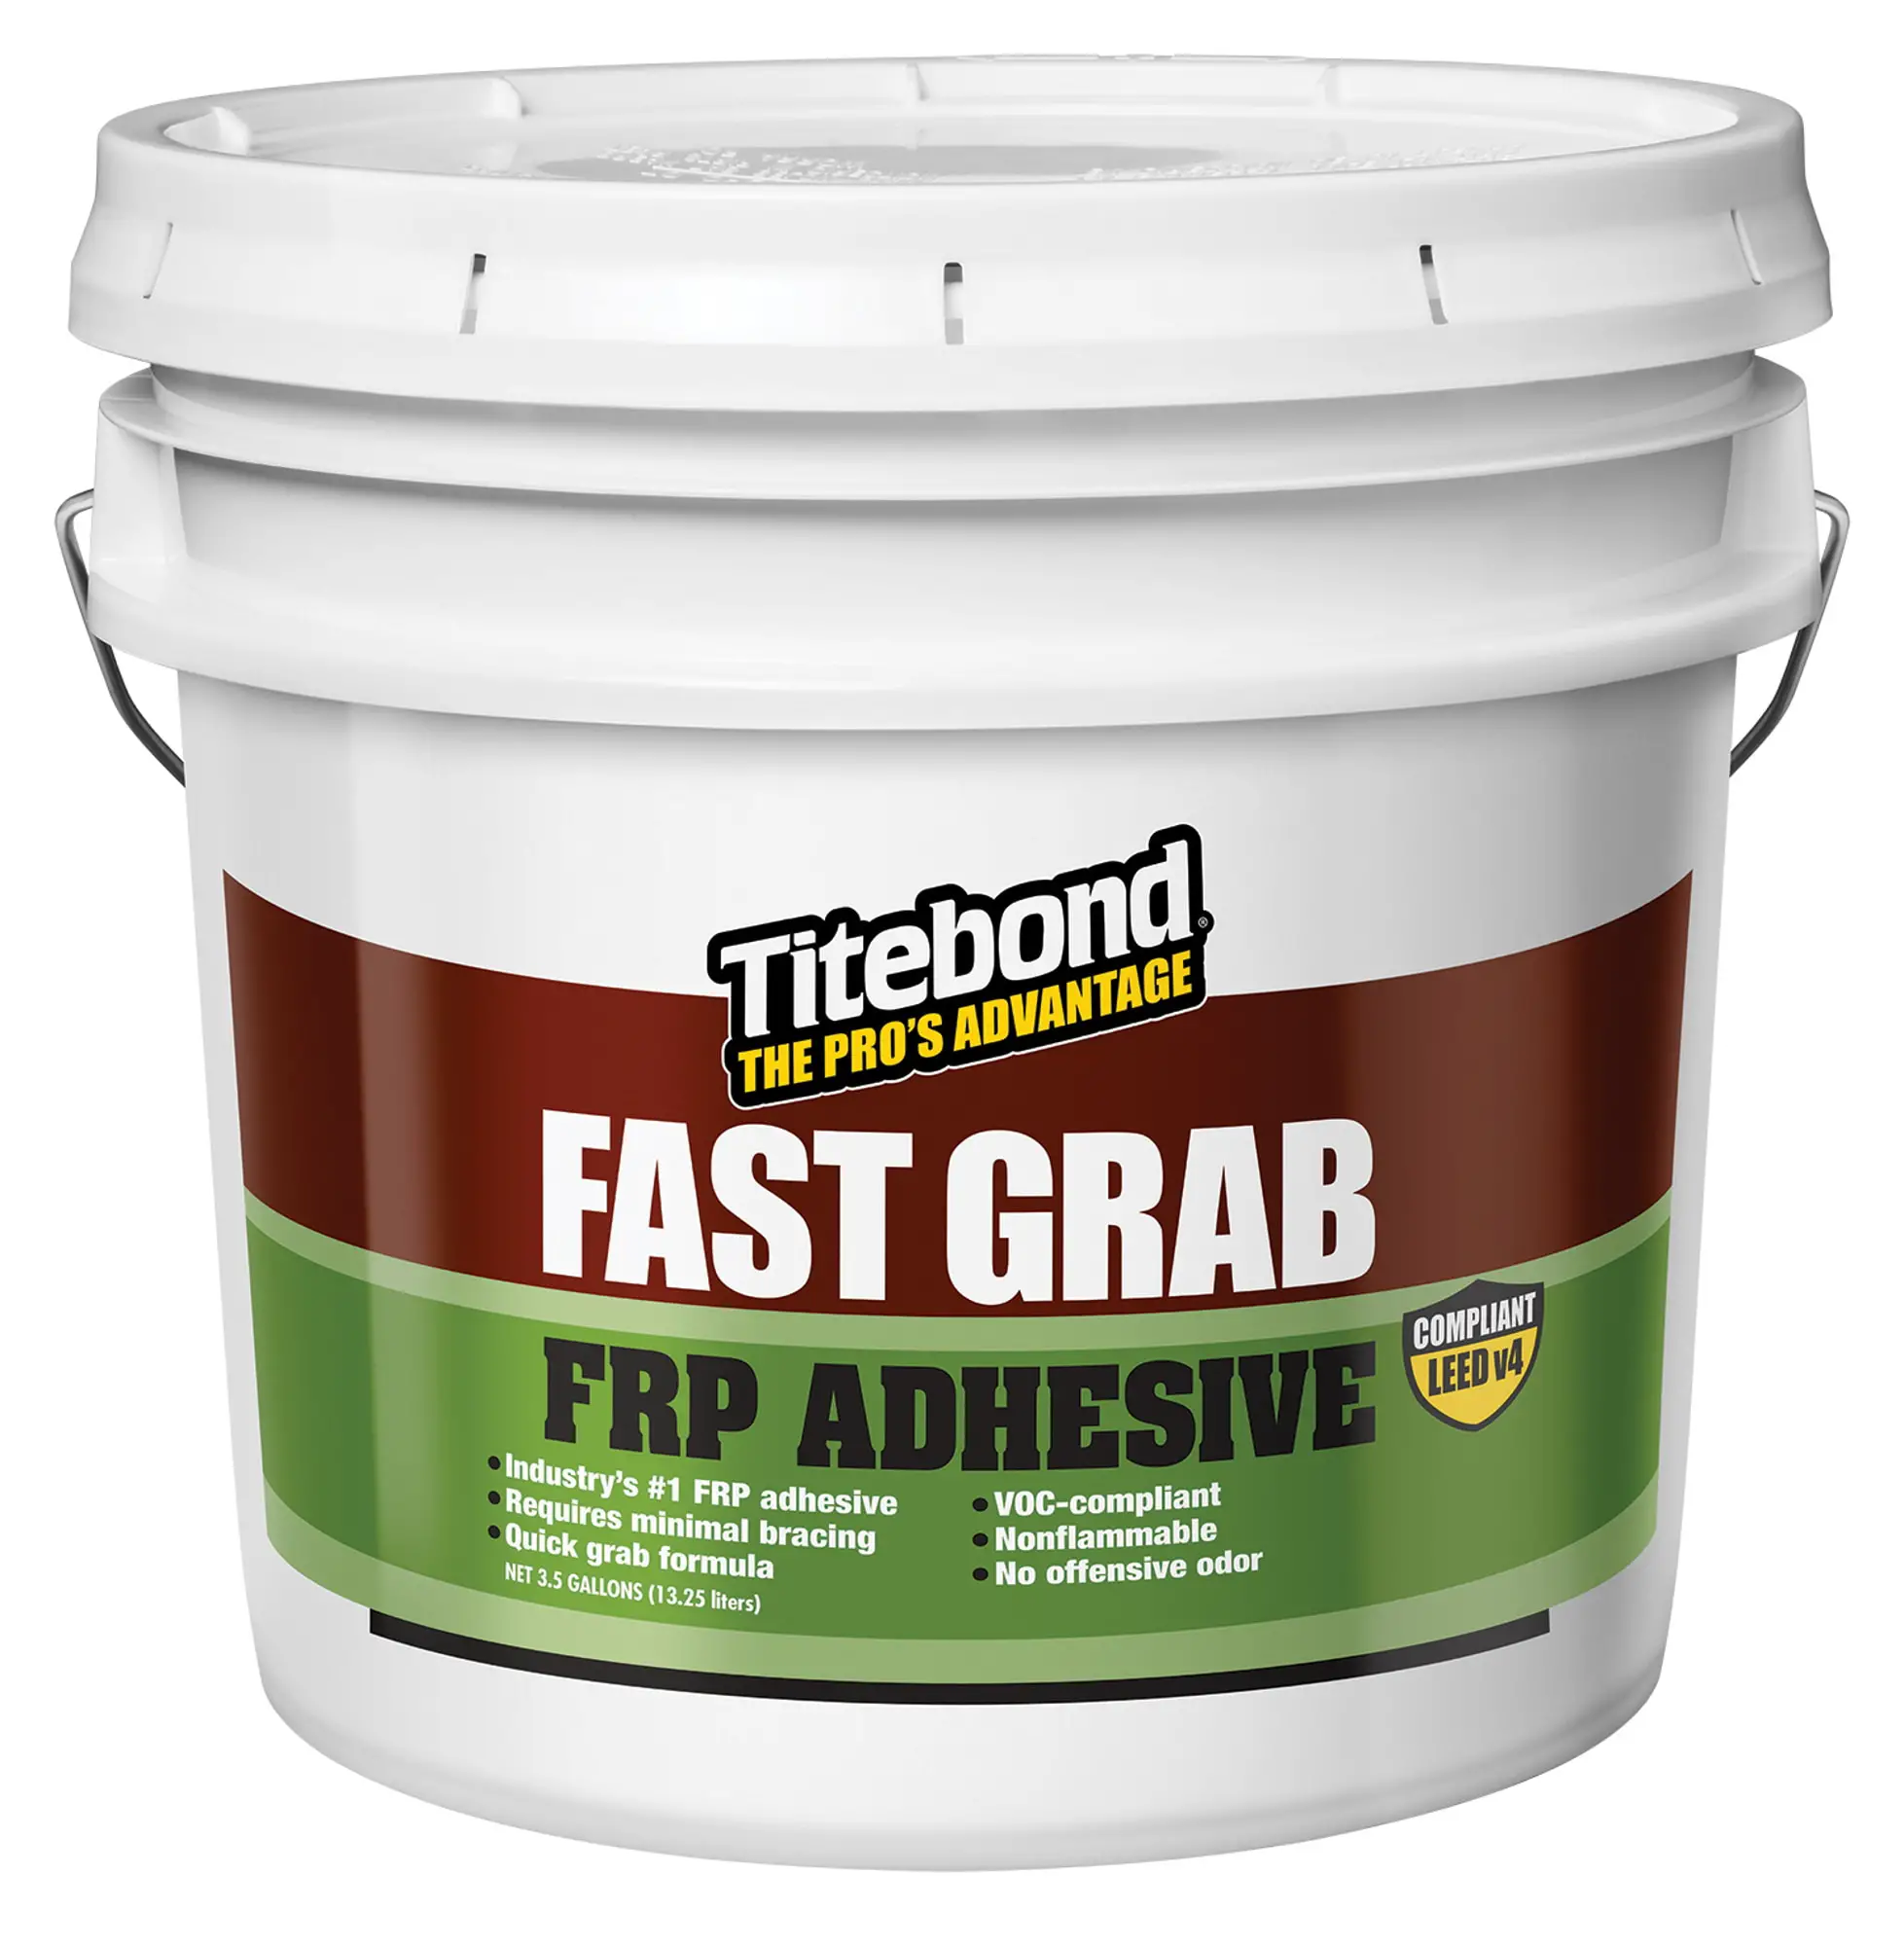 What Is Frp Adhesive